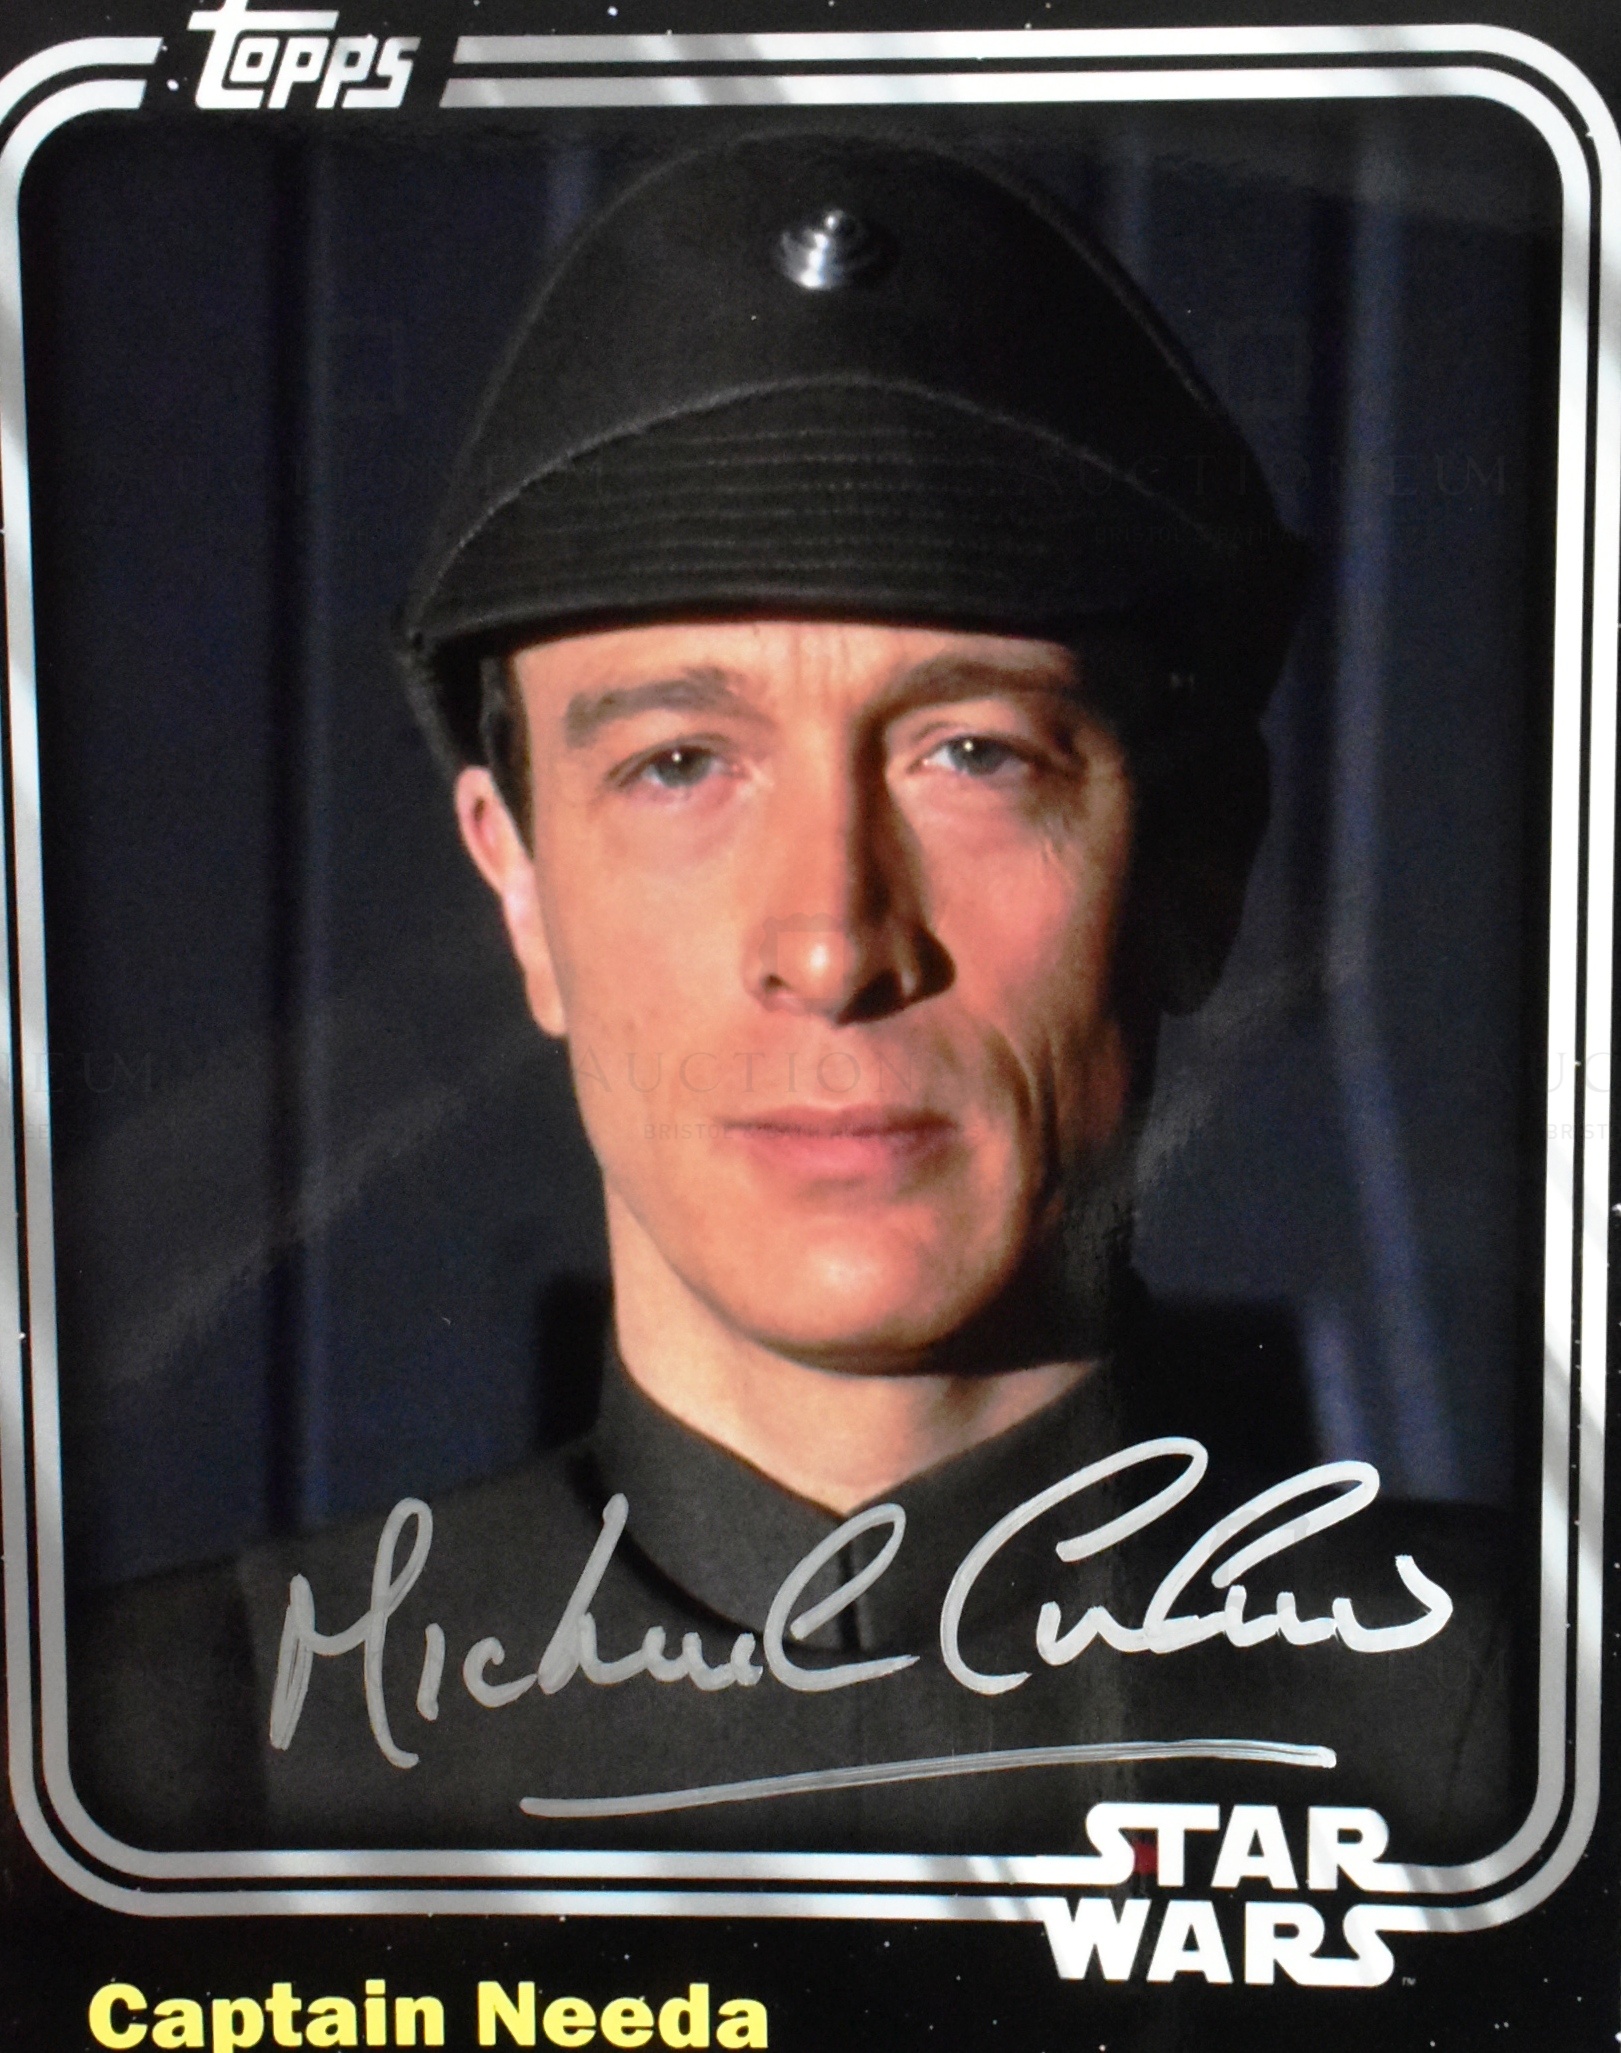 STAR WARS - IMPERIAL OFFICERS - AUTOGRAPH COLLECTION - Image 4 of 5